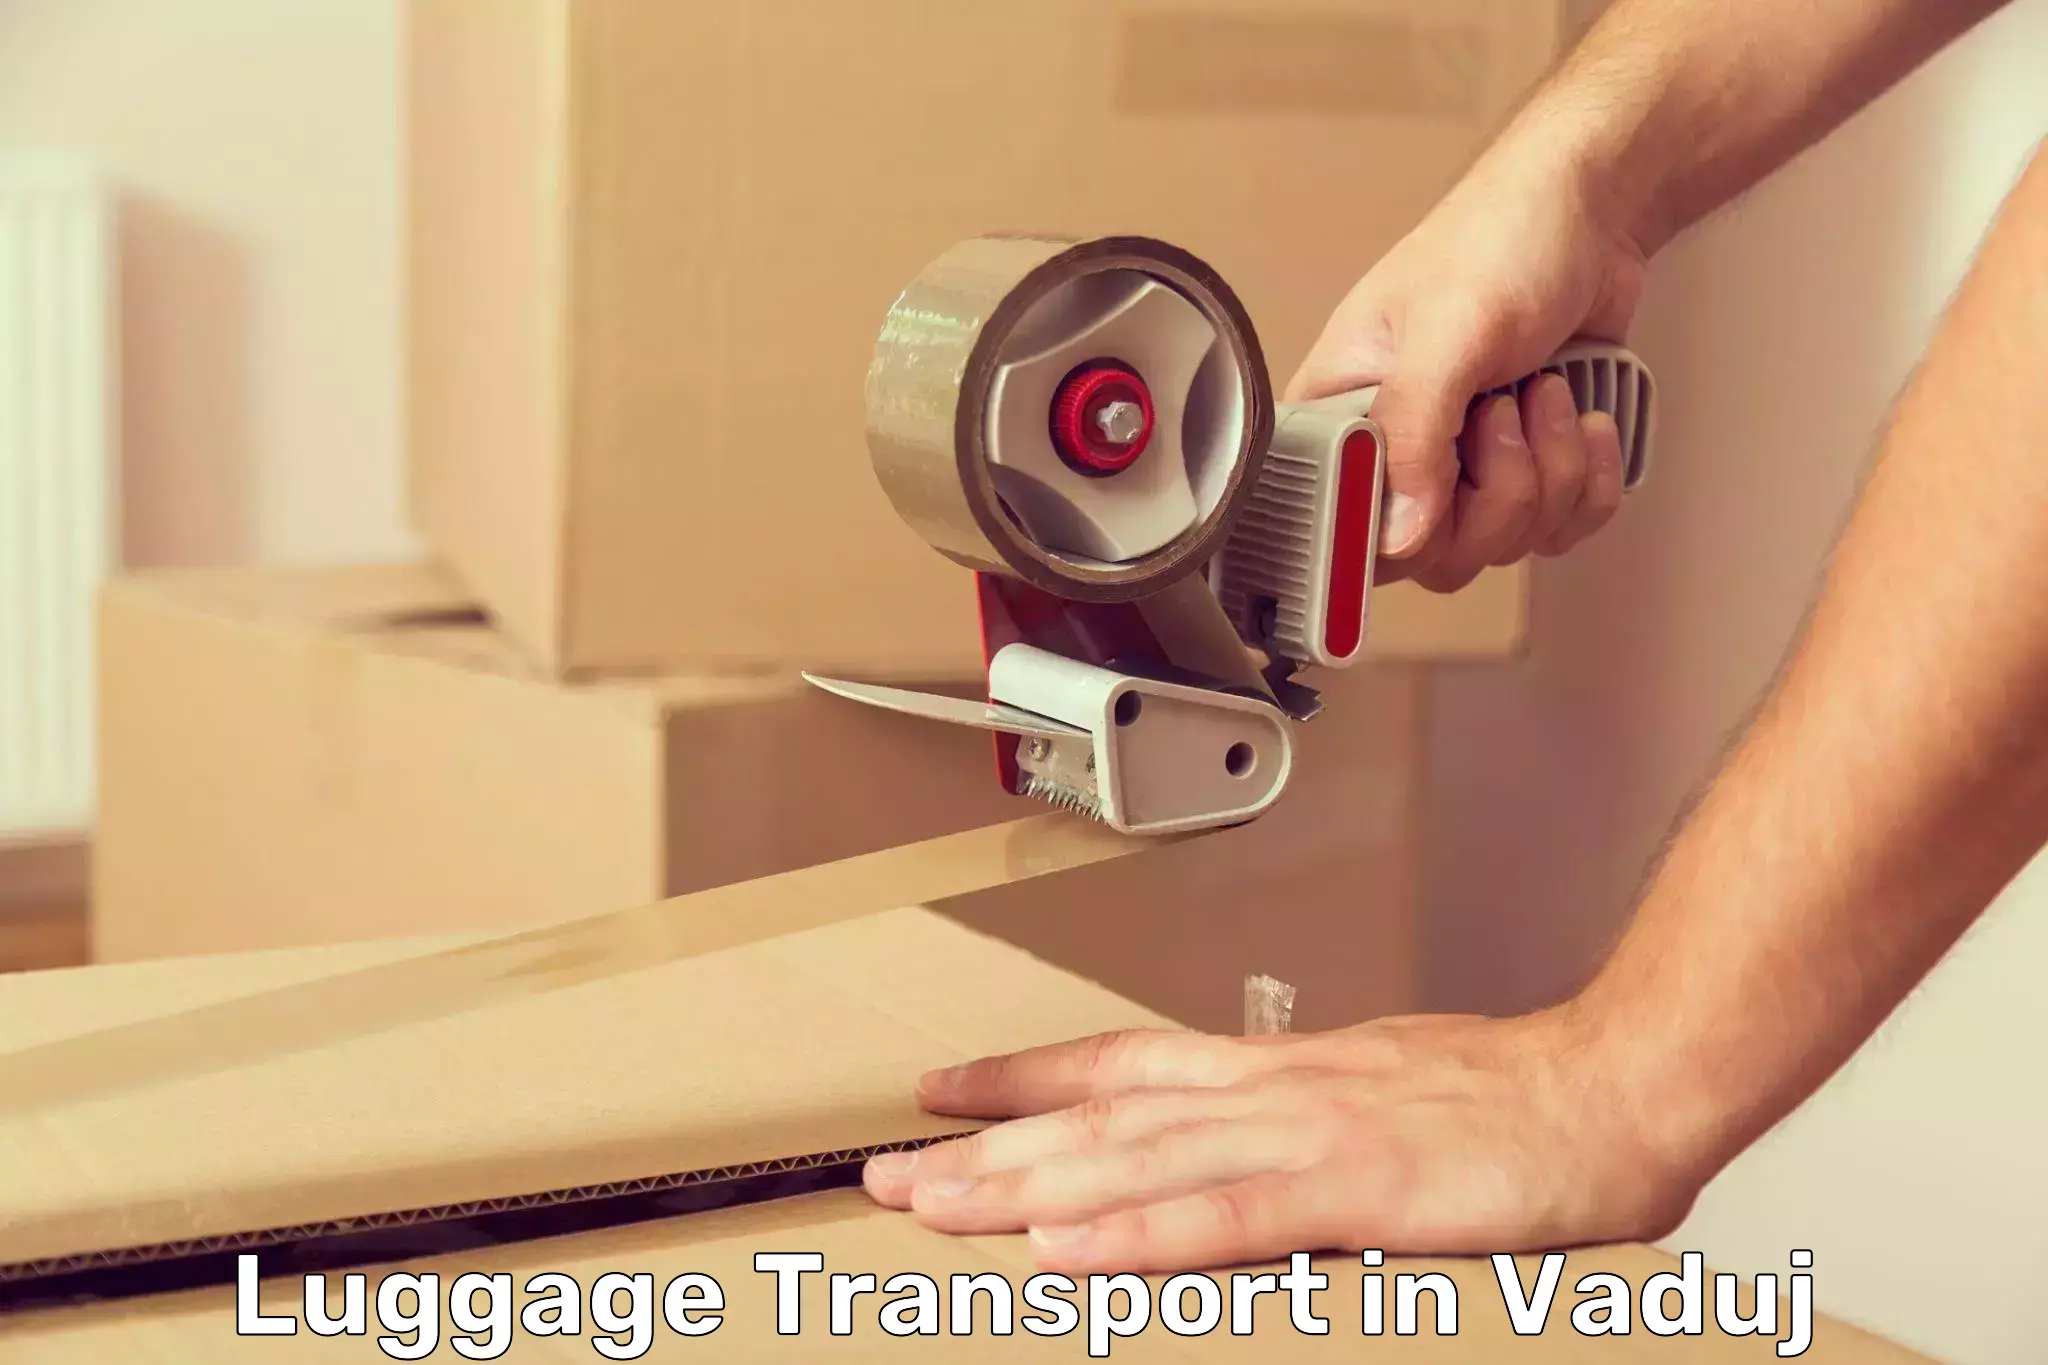 Business luggage transport in Vaduj